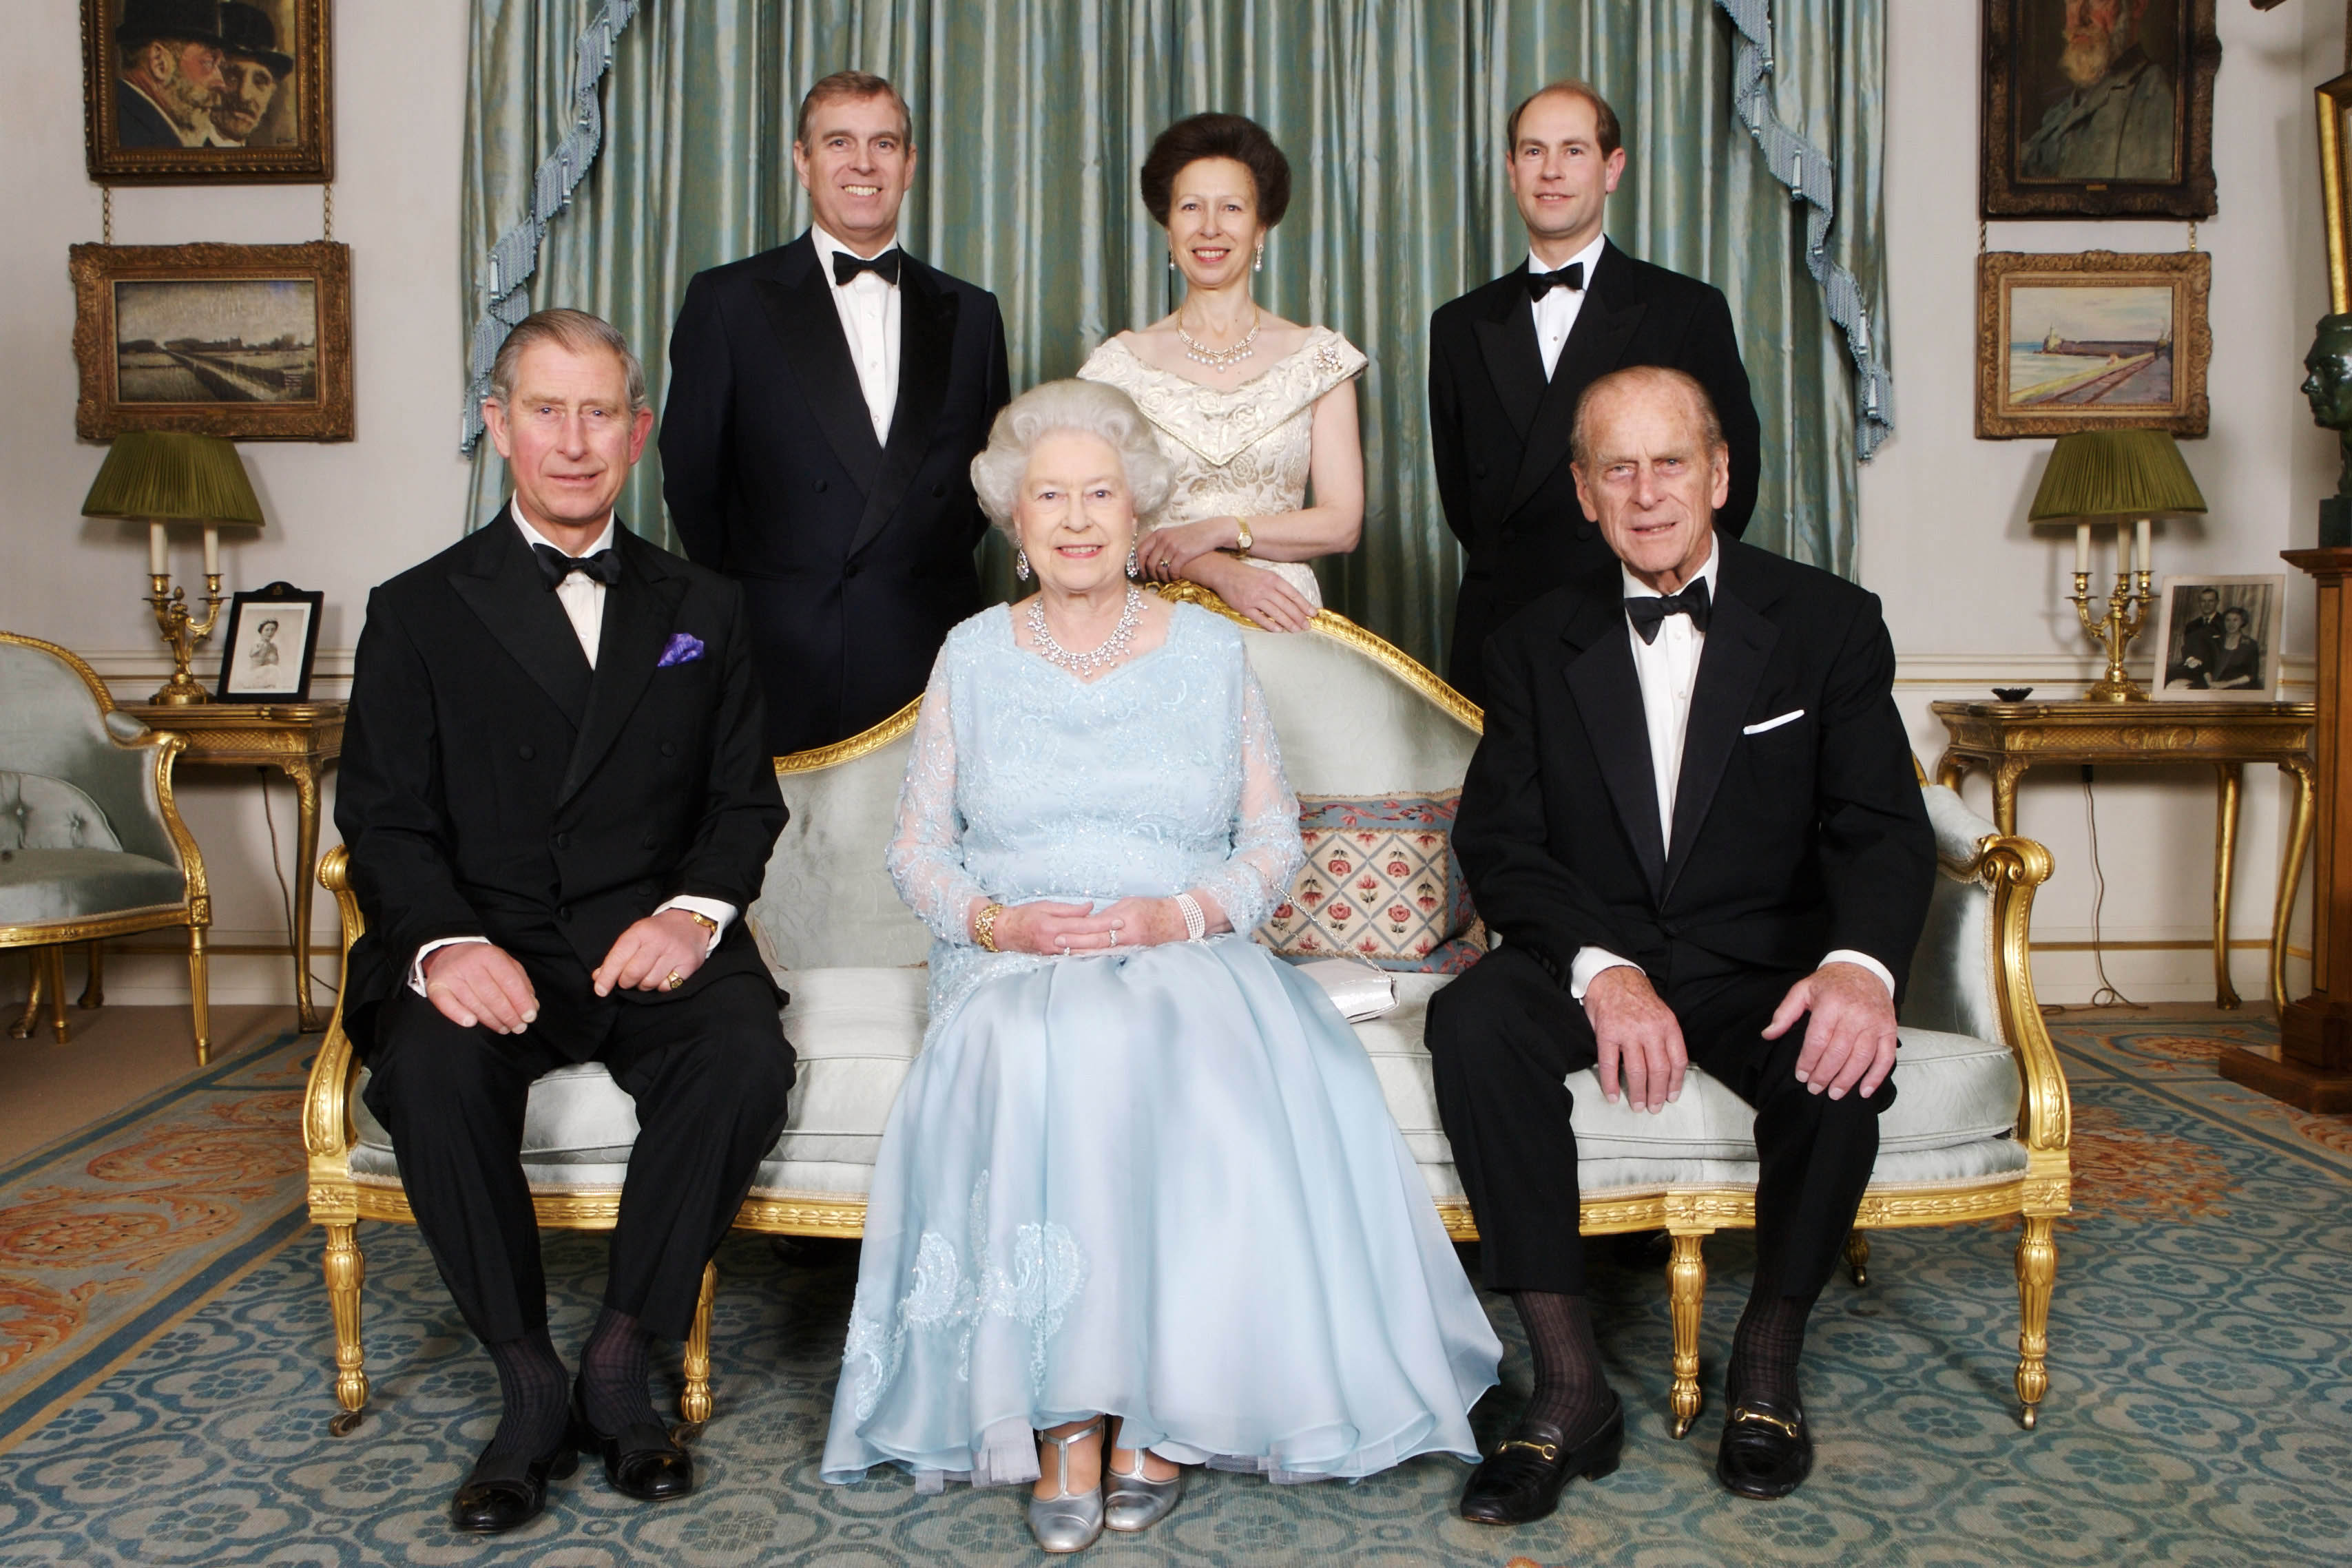 <p>Queen Elizabeth II and Prince Philip posed with their children -- Prince Charles, Princes Anne, Prince Andrew and Prince Edward -- at Clarence House in London before a Nov. 18, 2007, dinner to celebrate their diamond wedding anniversary marking 60 years of marriage.</p>